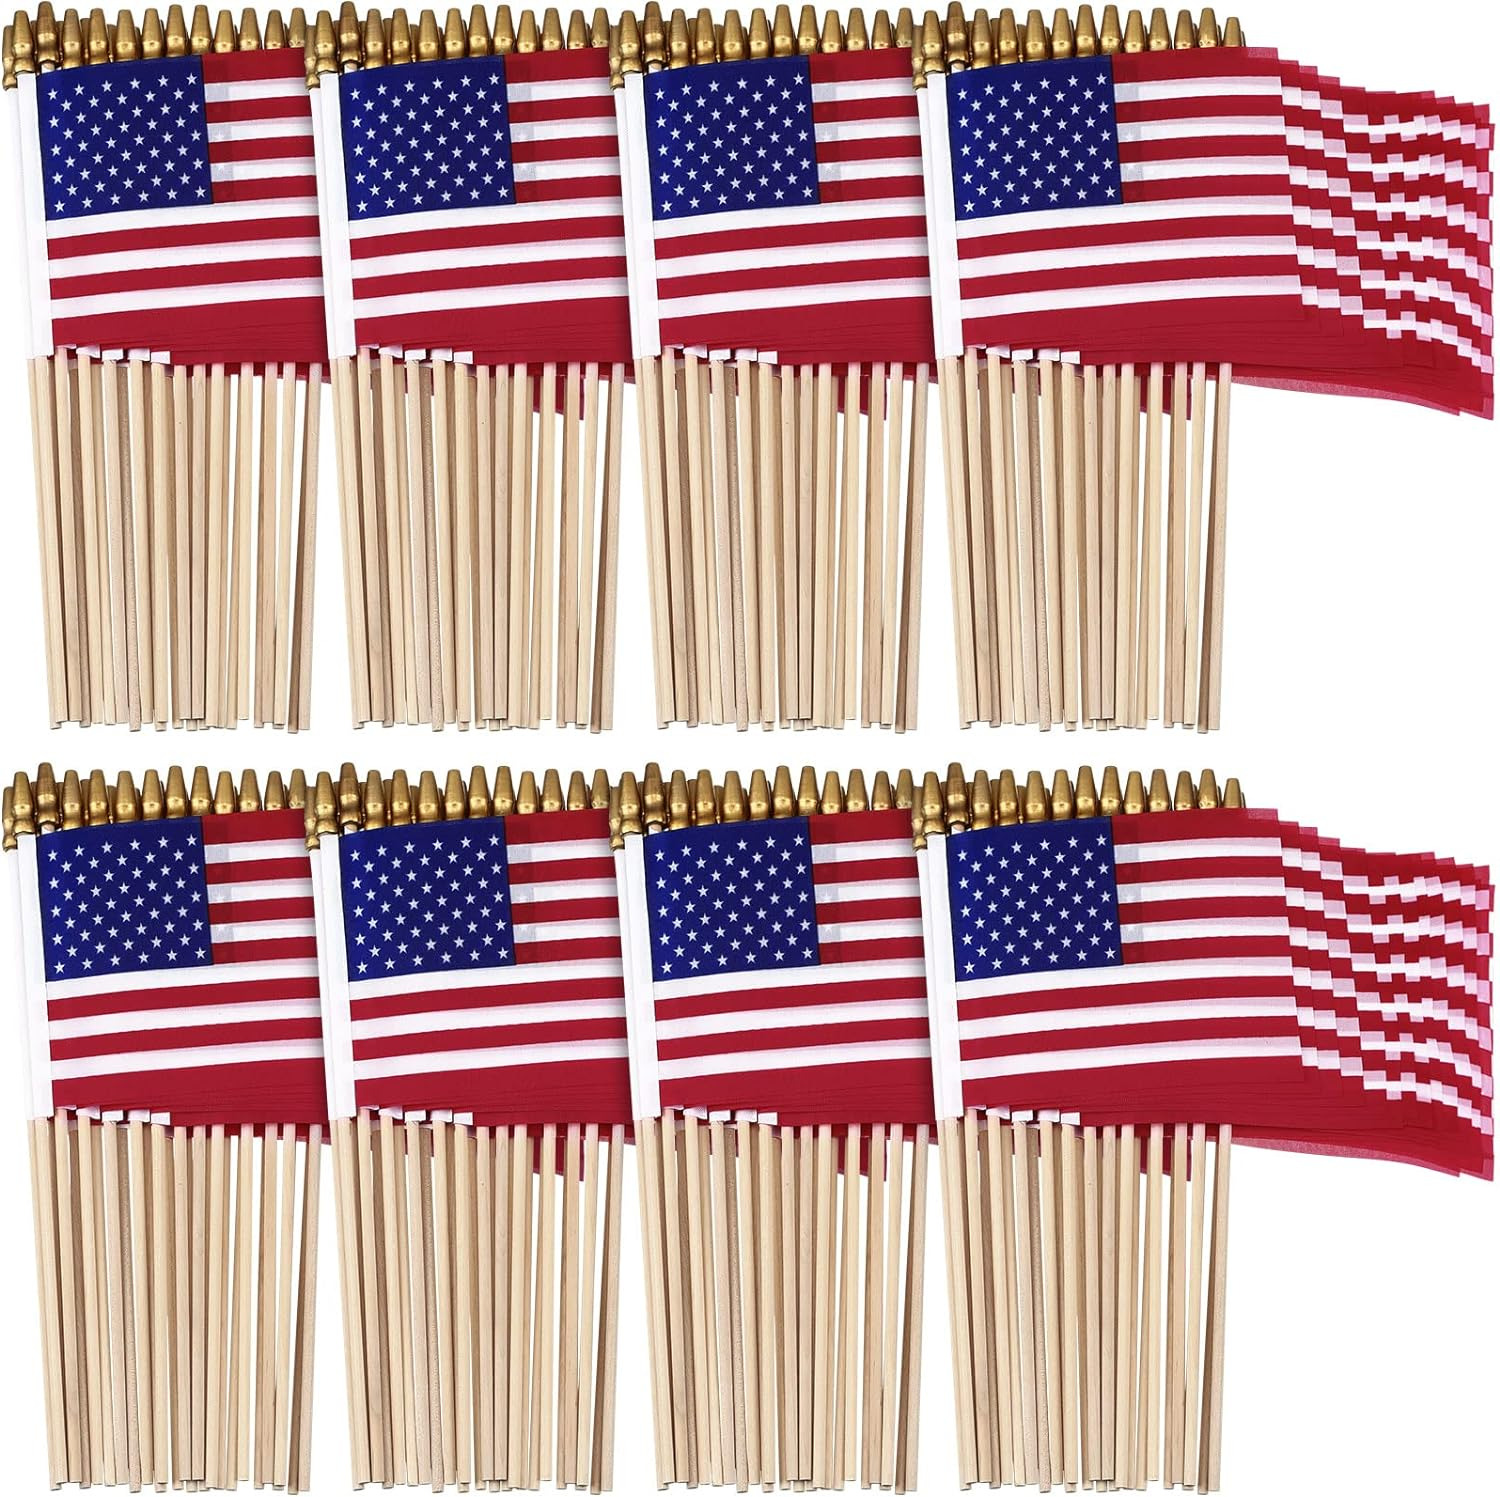 100 Packs Small American Flags on Sticks 4 X 6 Inches Small Handheld US Flags on